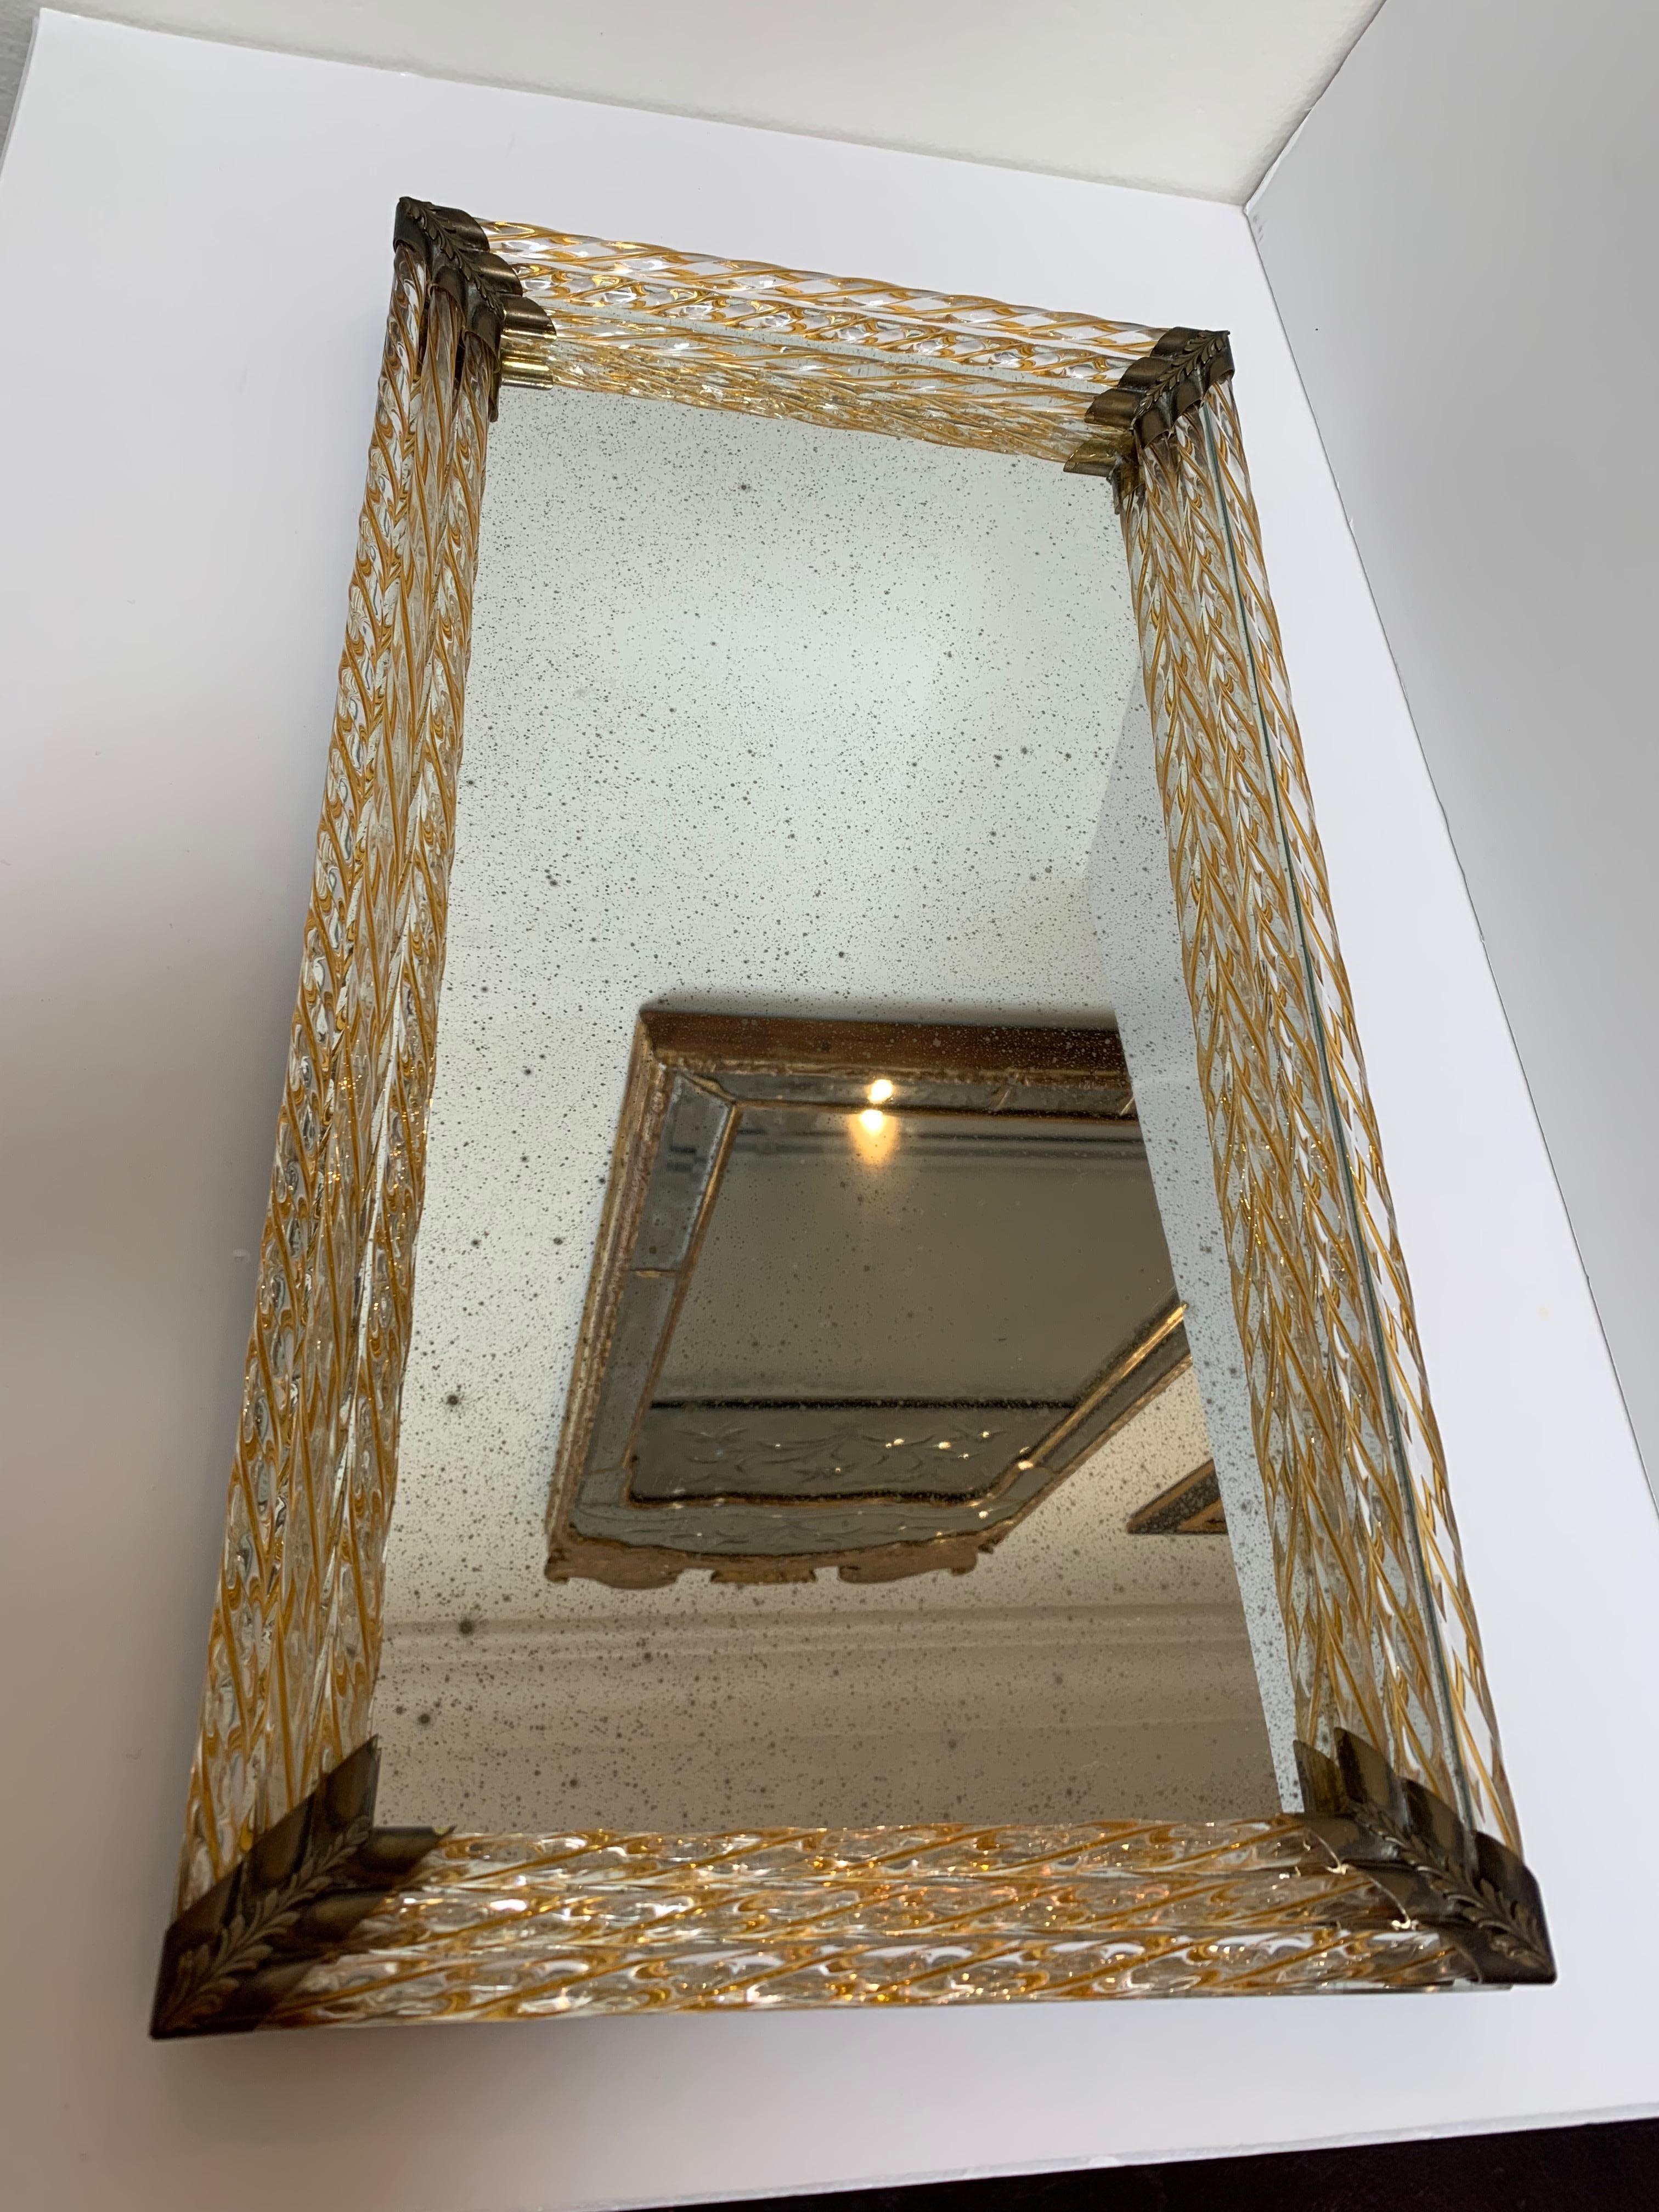 Venetian antique mirror tray with original gold glass twisted rods, brass hardware.